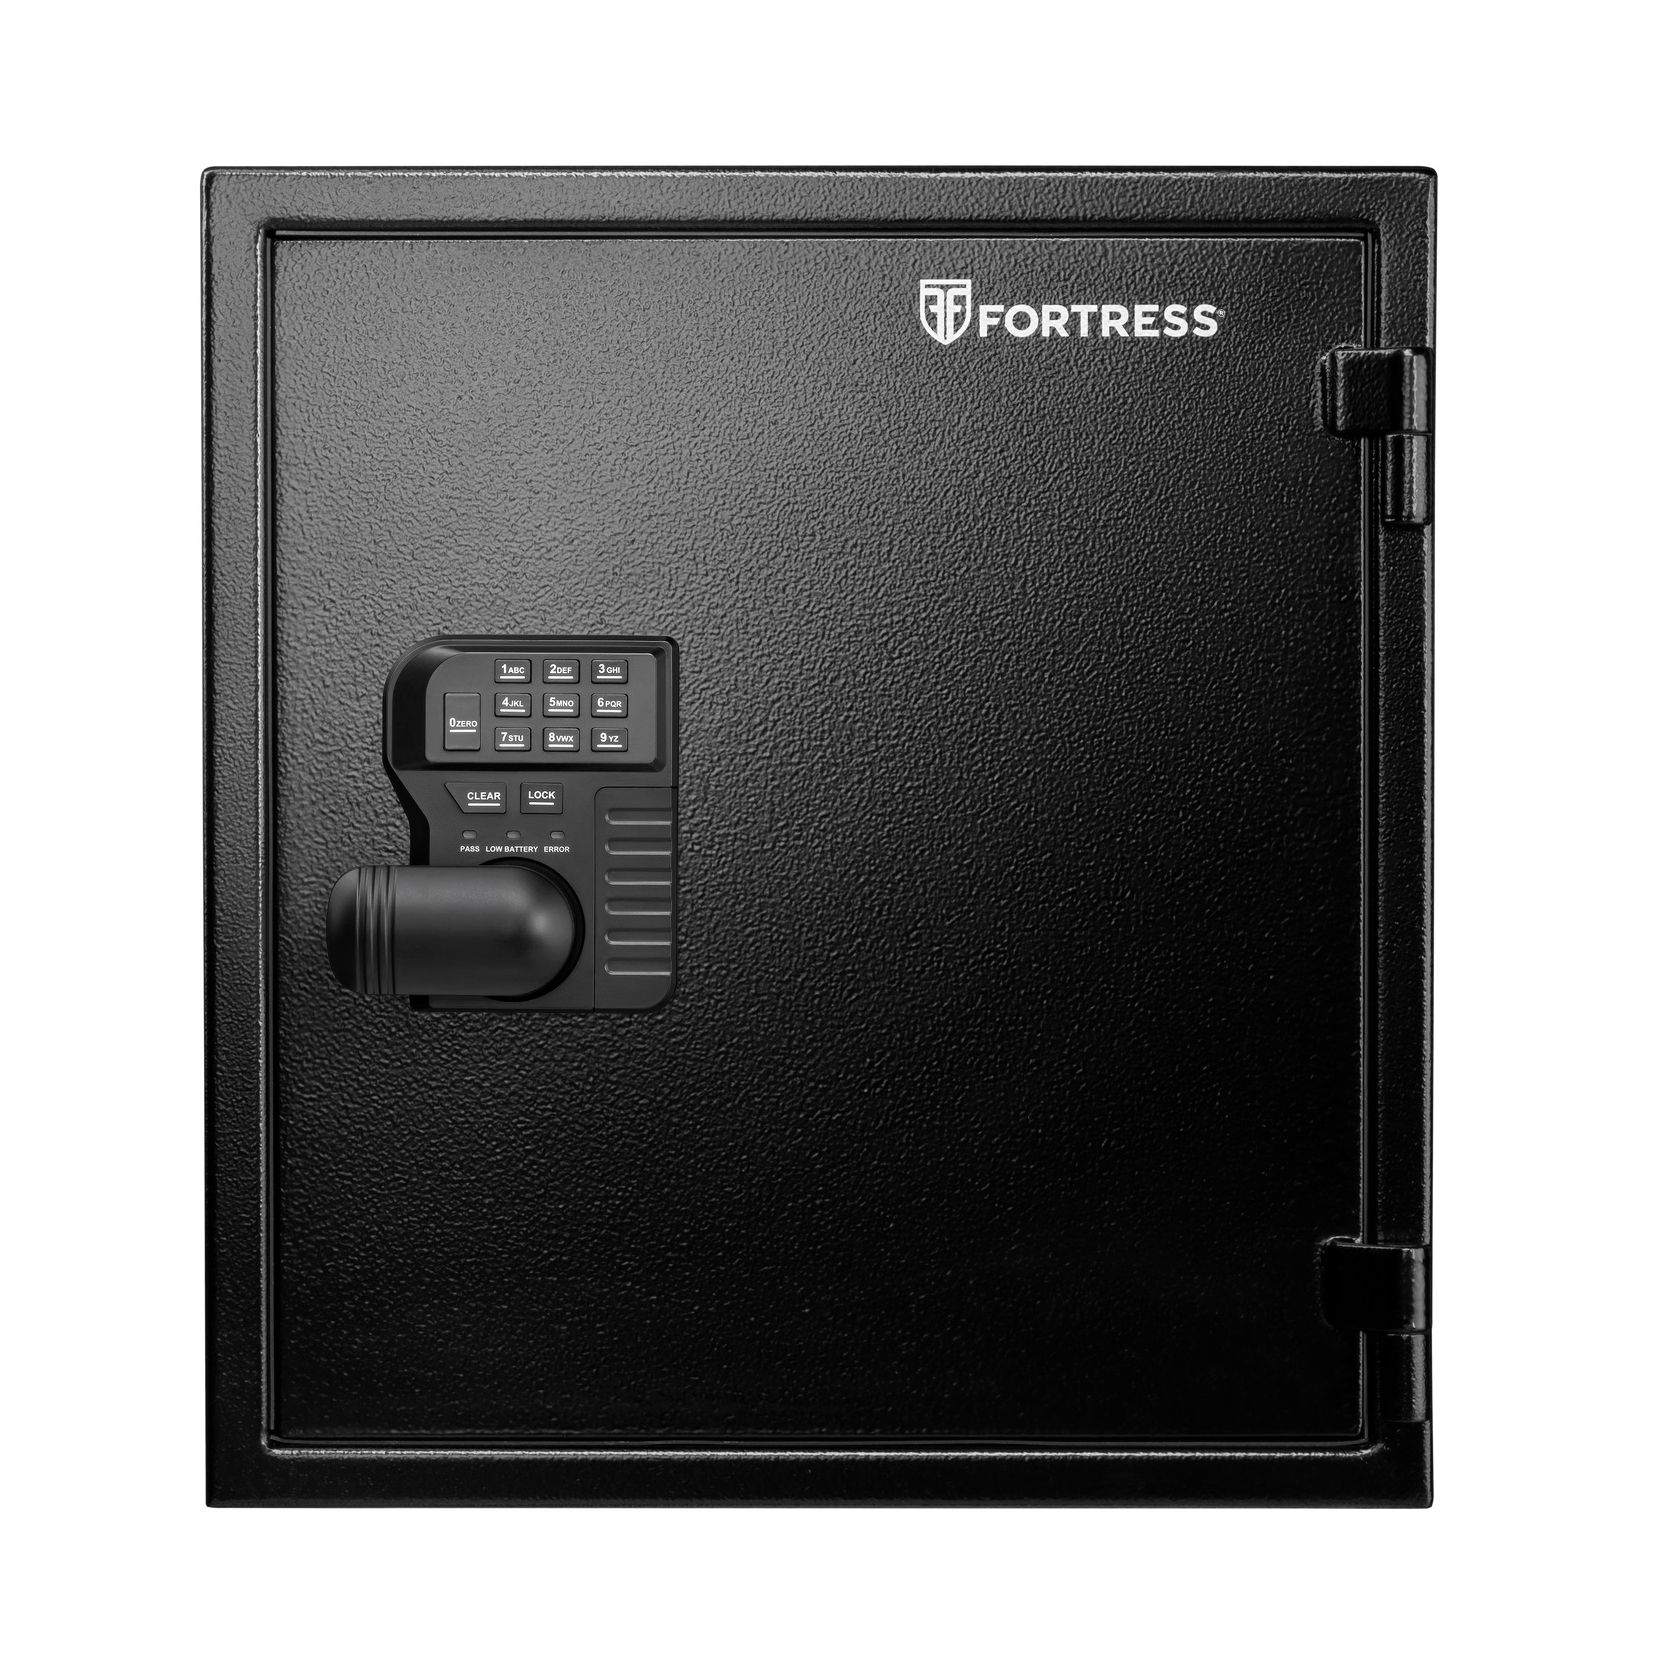 Fortress Large 1.74-Cu.-Ft. Personal Fire and Waterproof Safe with Electronic Lock